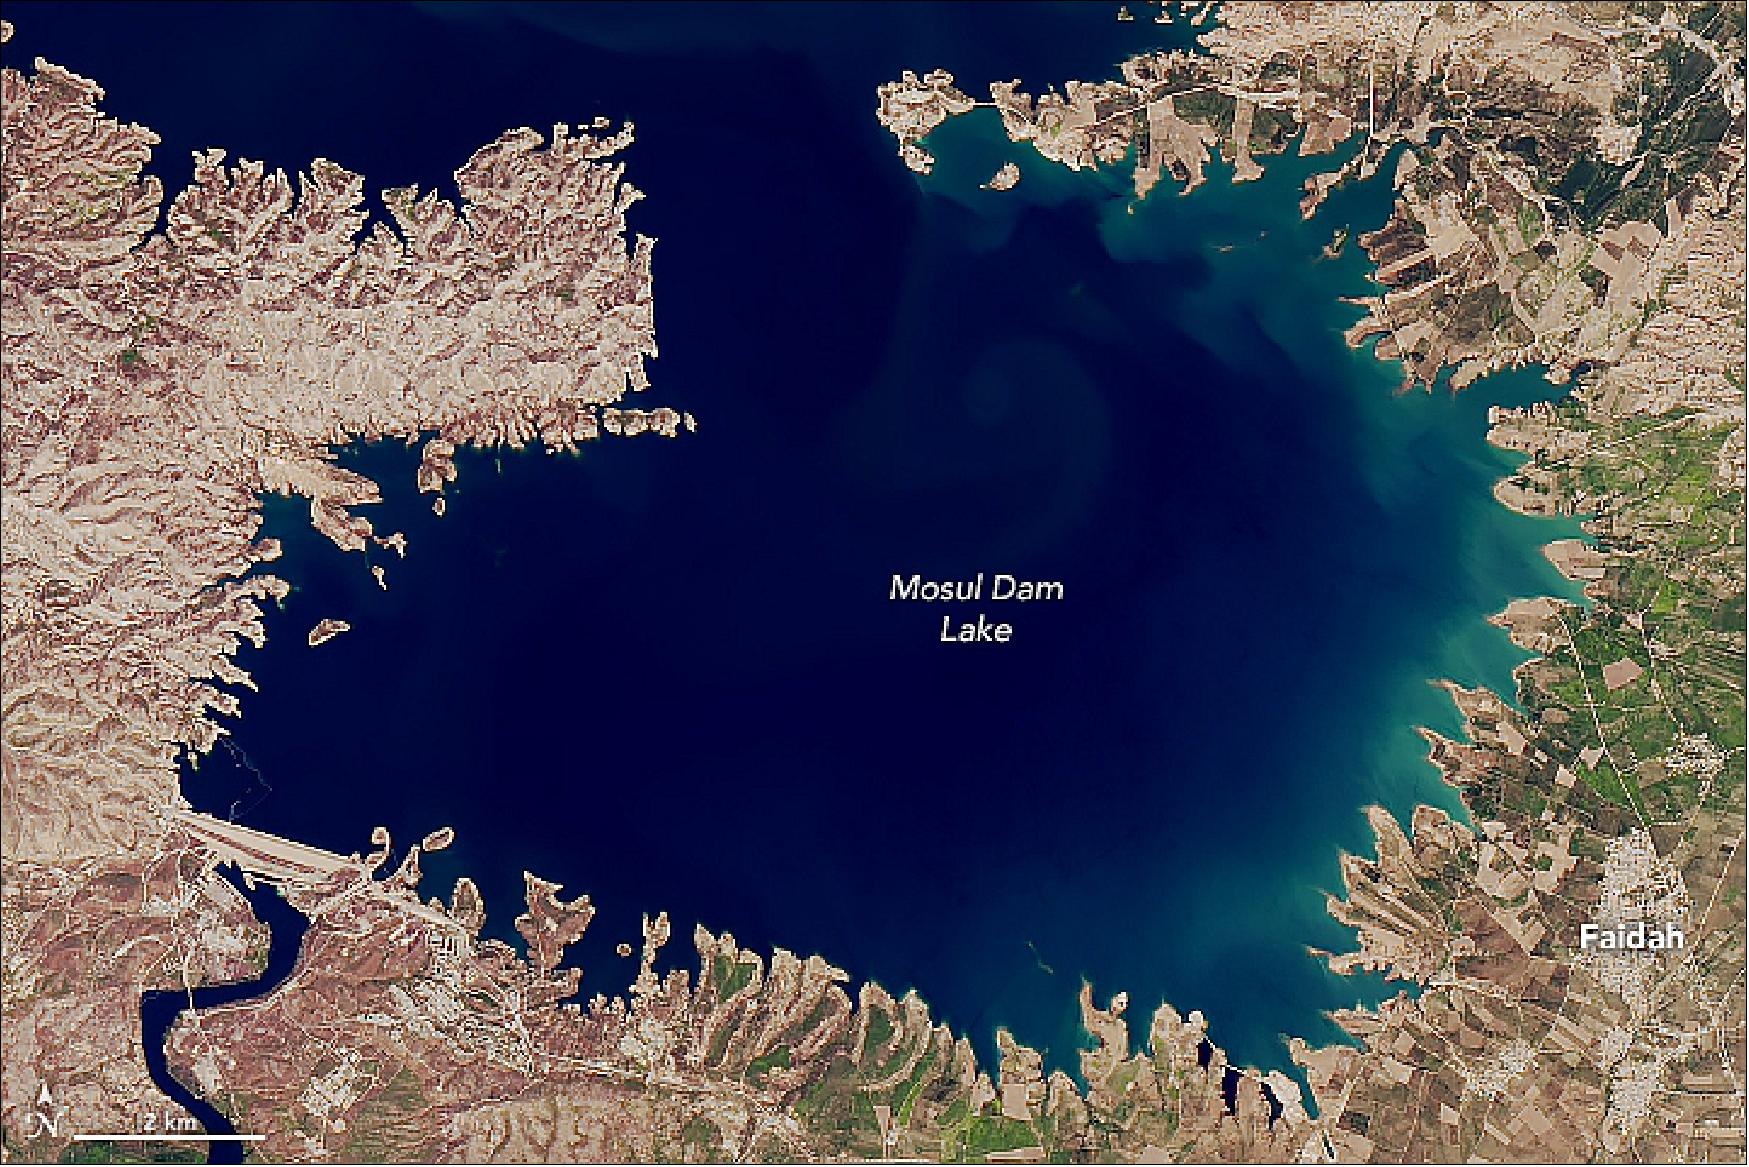 Figure 83: The upstream Mosul Dam Lake image acquired with OLI on Landsat-8 on 25 April 2015 (image credit: (image credit: NASA Earth Observatory images by Joshua Stevens, using Landsat data from the U.S. Geological Survey, Story by Adam Voiland)